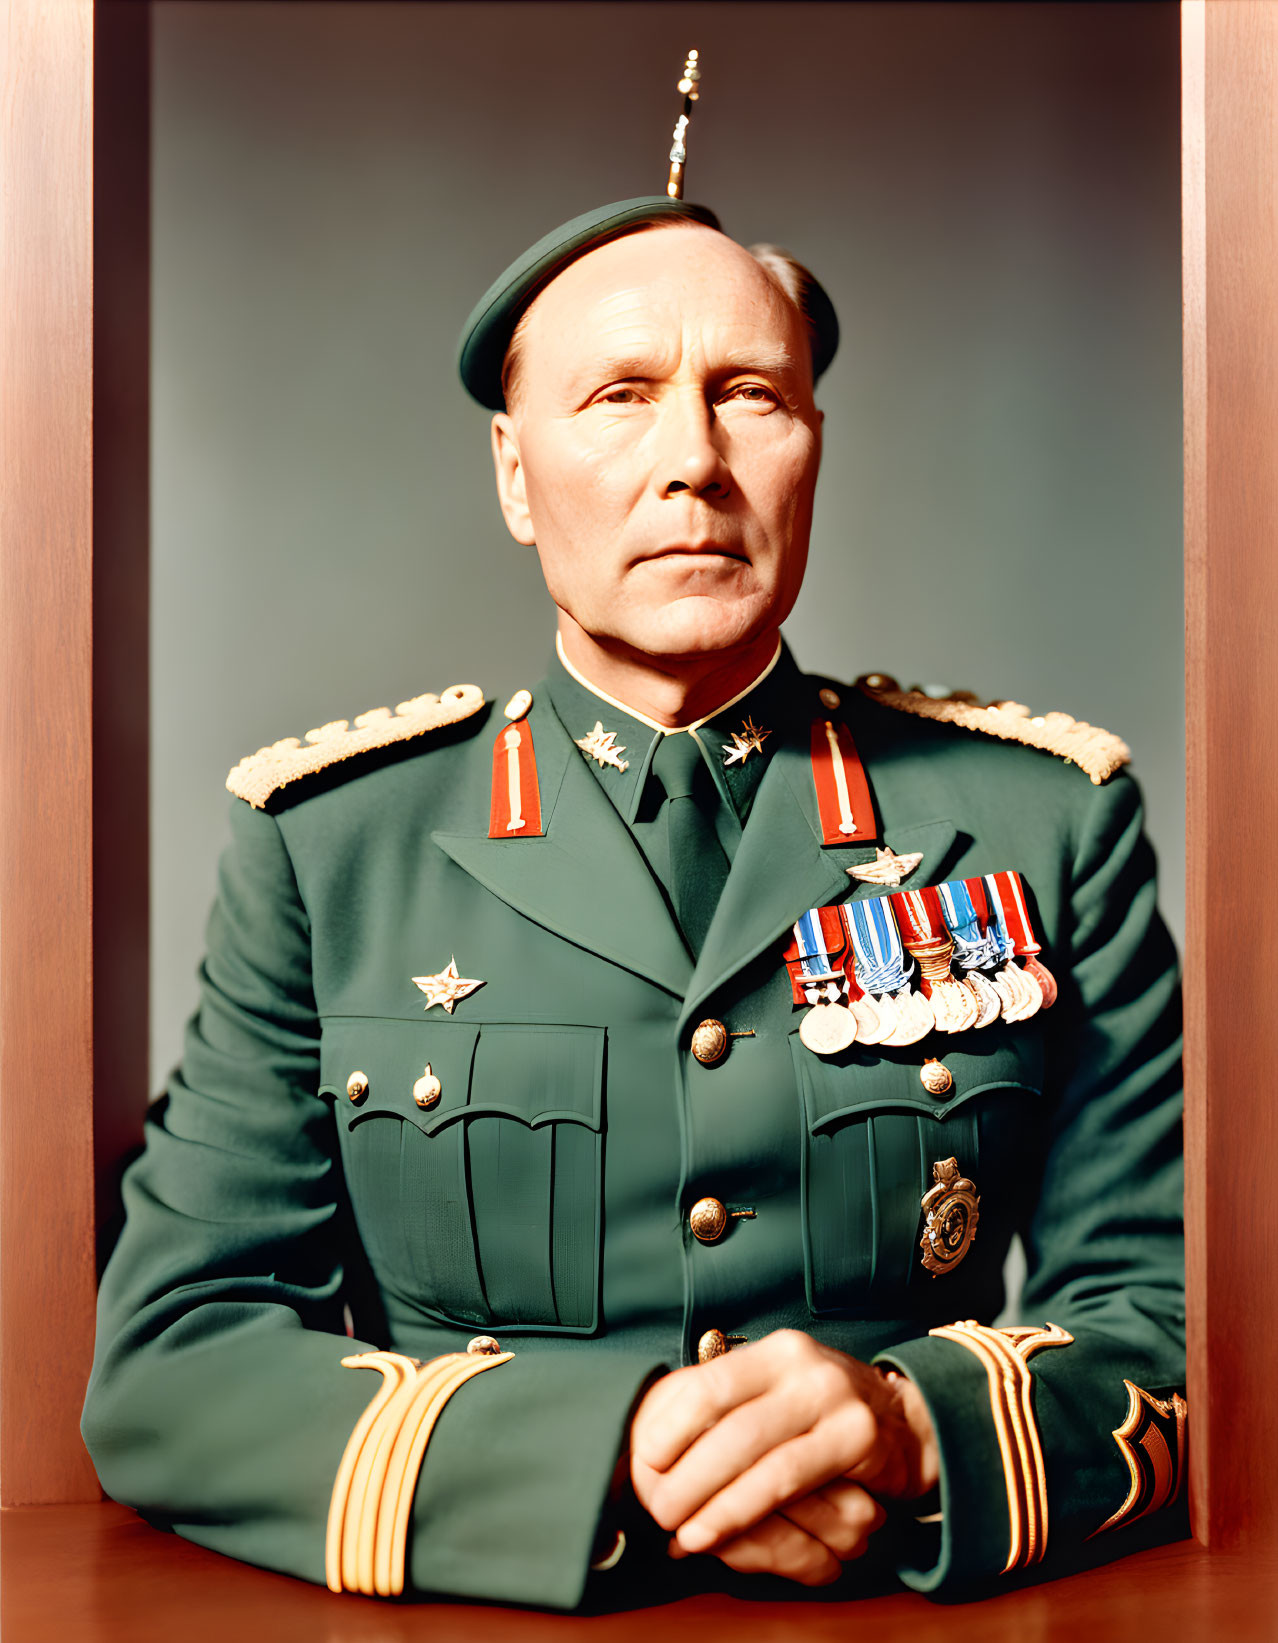 Military man in green uniform with medals posing on brown backdrop